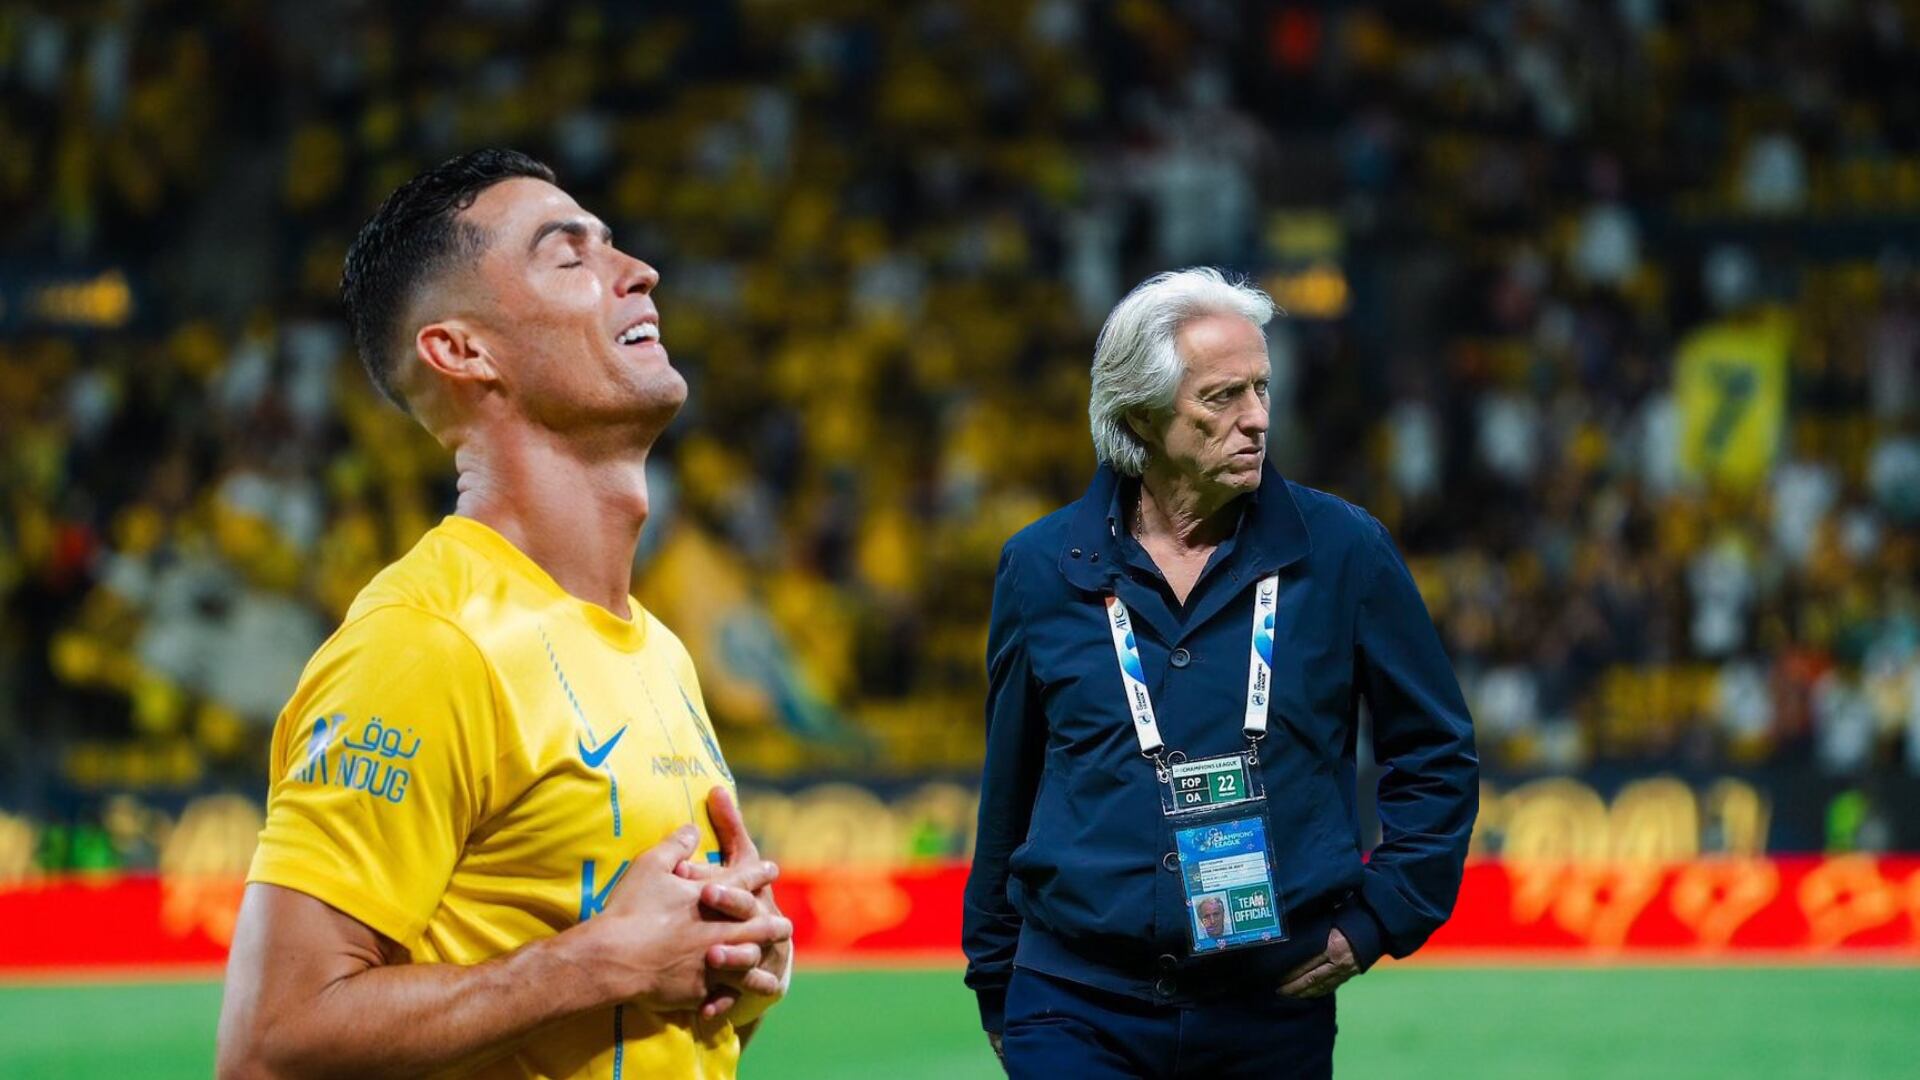 Despite the rivalry with Cristiano’s Al Nassr, Al Hilal’s Jorge Jesus gives CR7 this high praise that causes debate